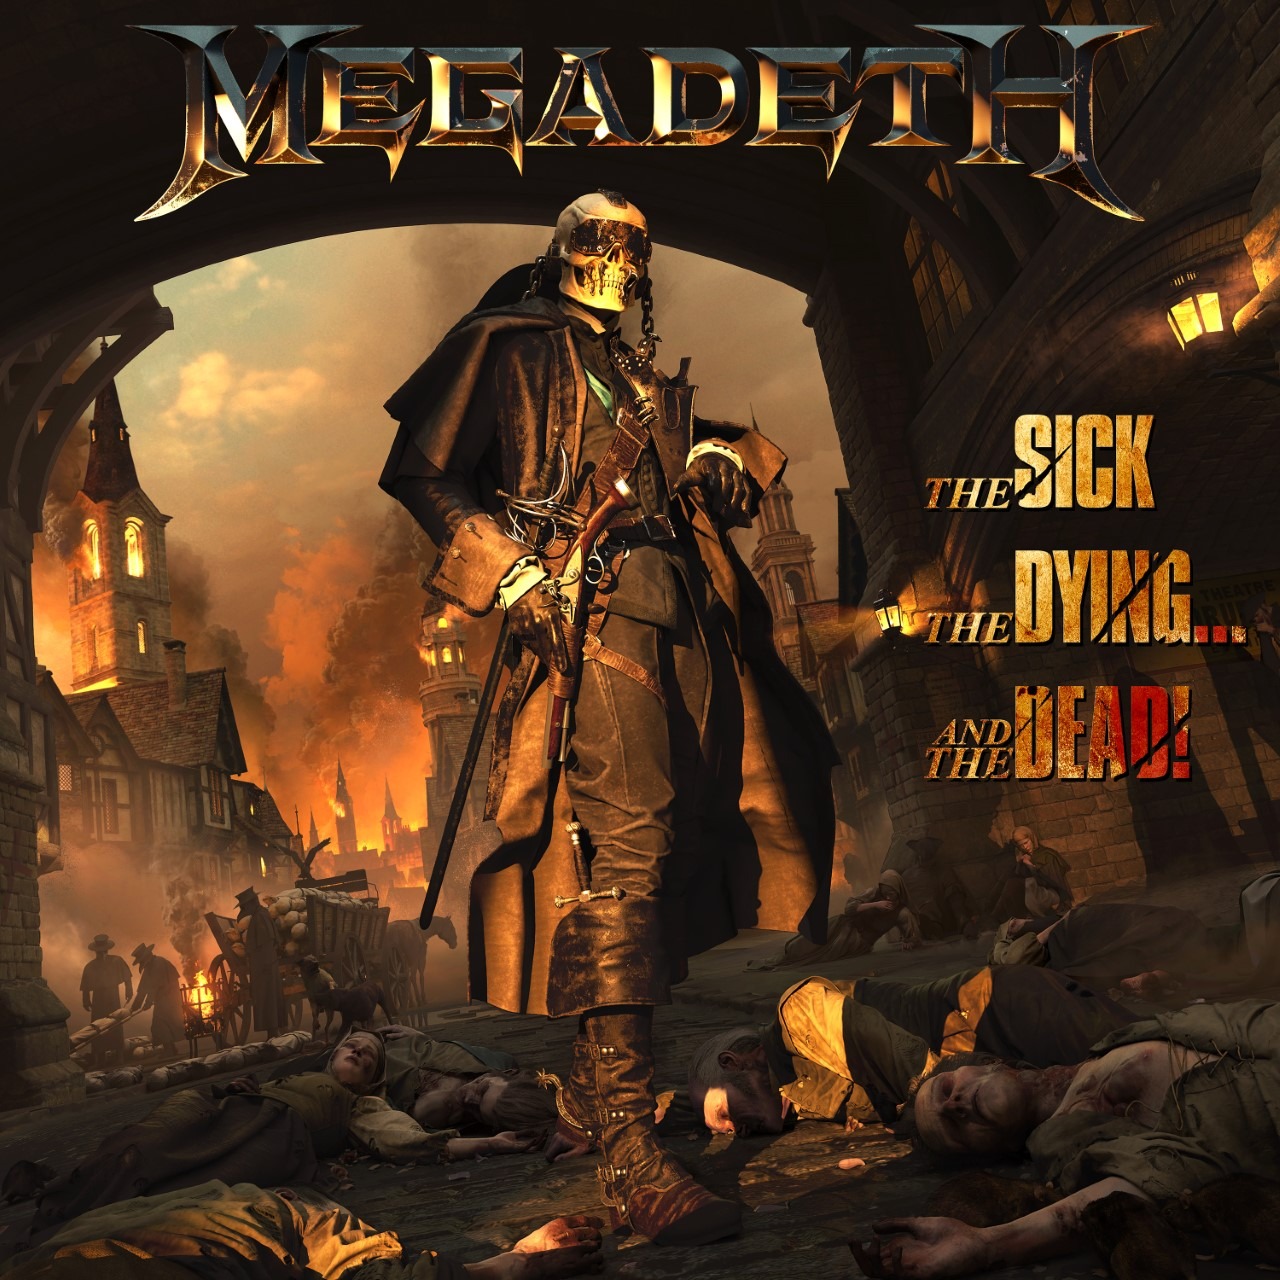 Megadeth (Finally) Returns With Single "We'll Be Back" and New Album 'The Sick, the Dying... and the Dead!'